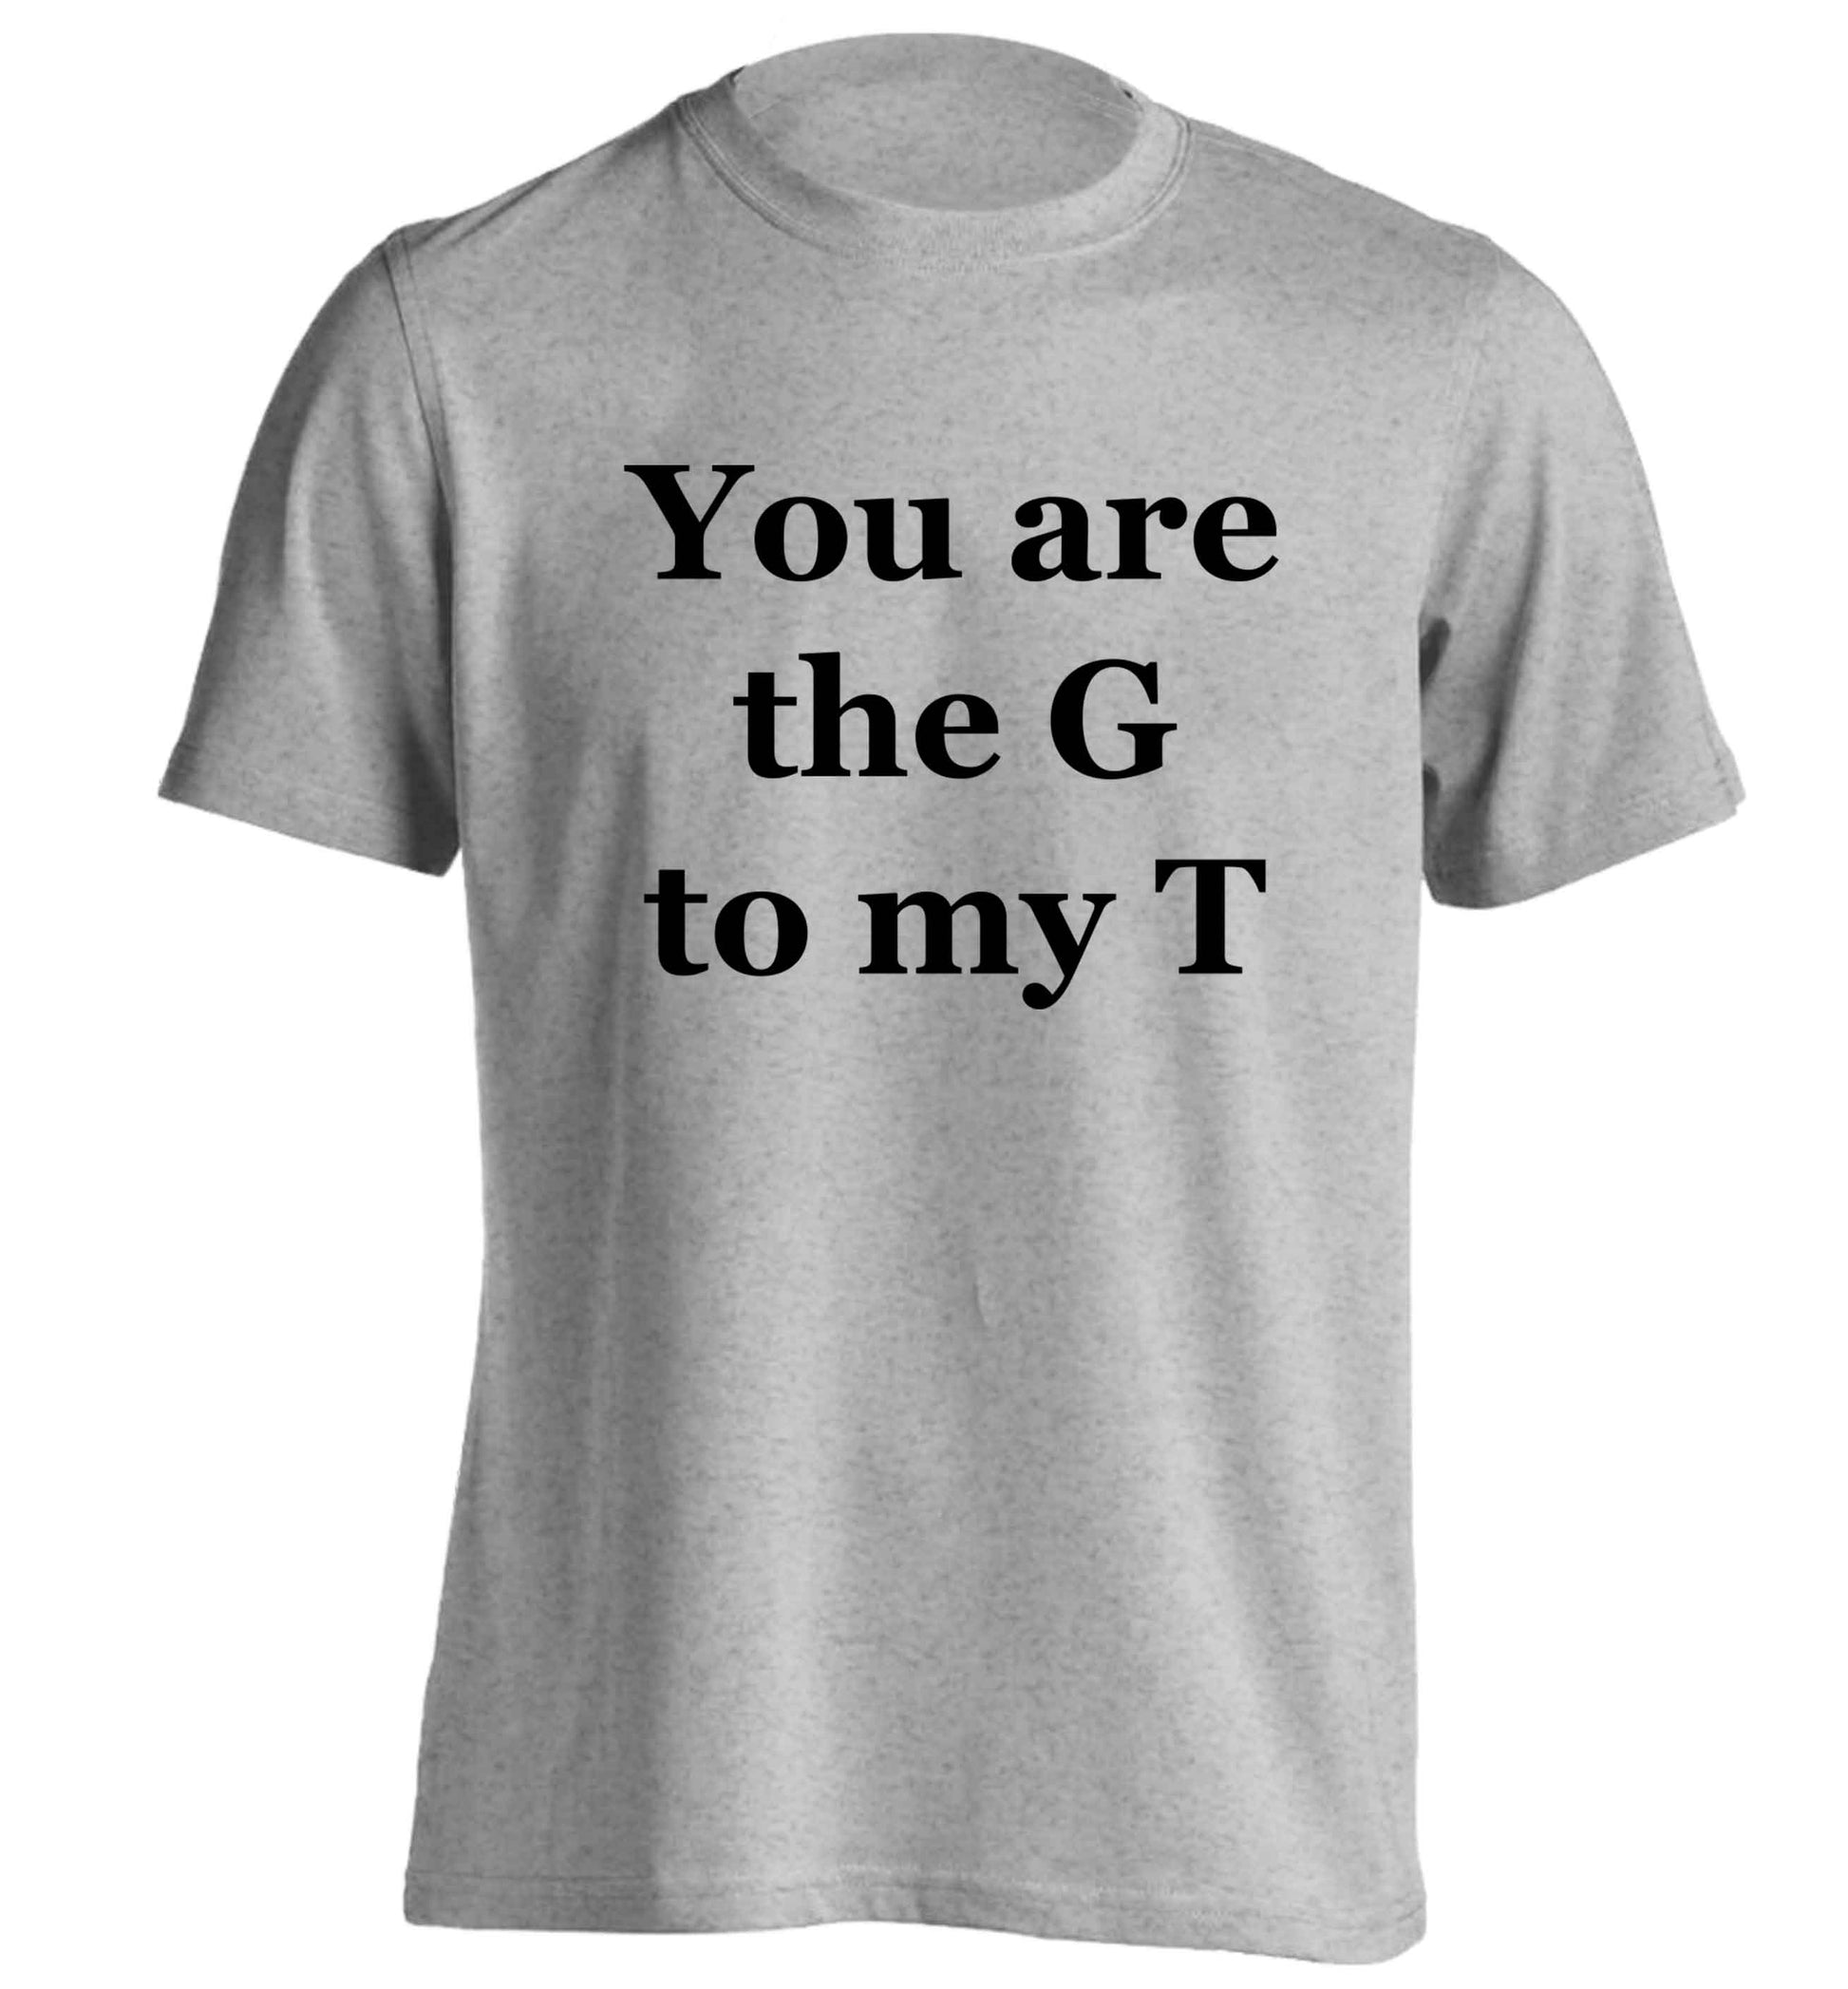 You are the G to my T adults unisex grey Tshirt 2XL